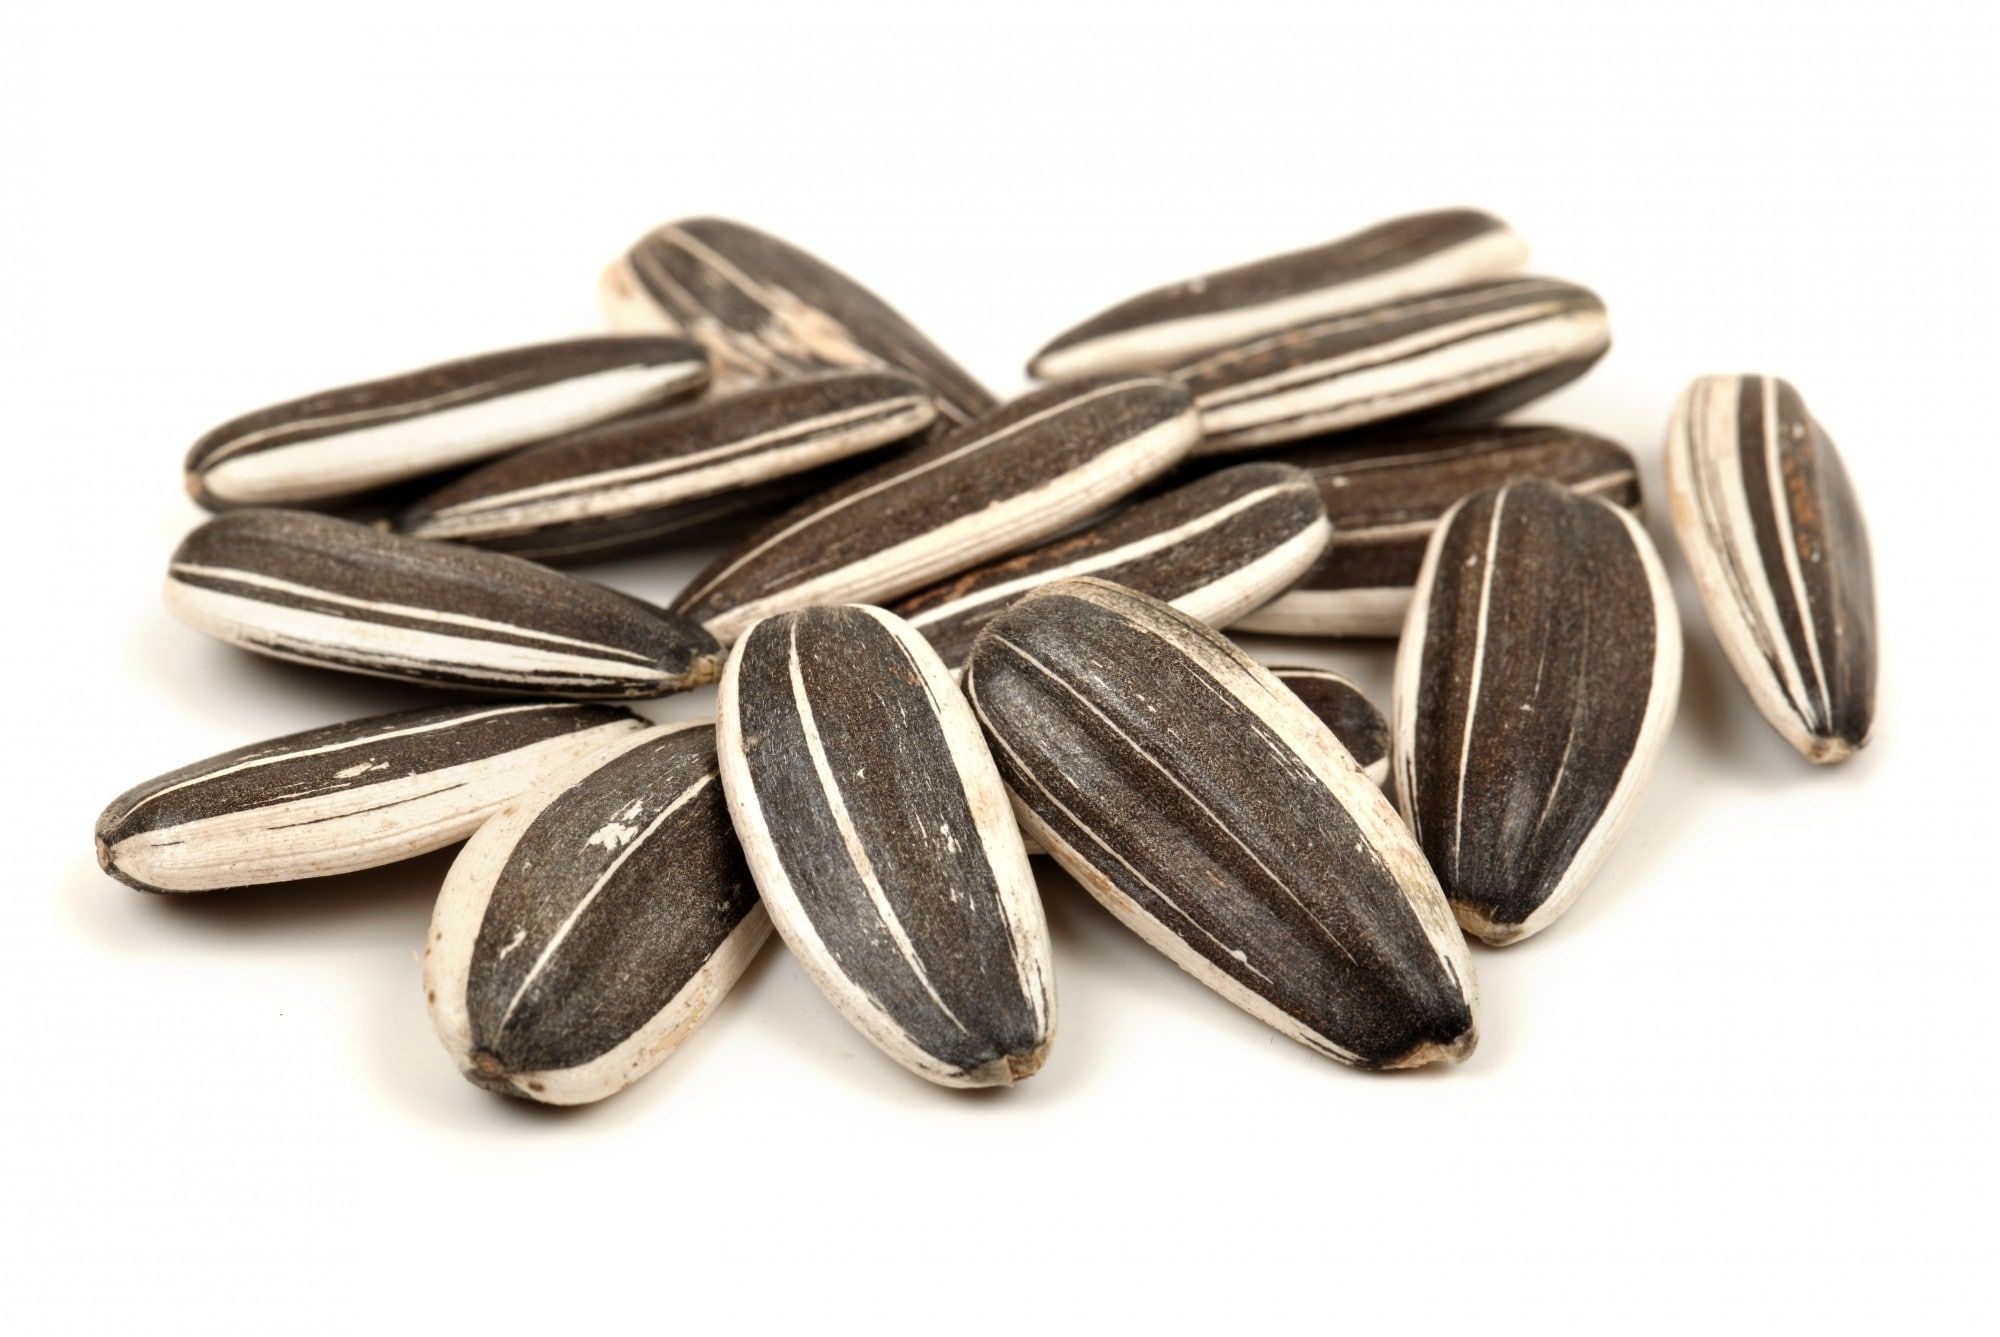 Roasted unsalted sunflower seeds, Health benefits, PipingRock products, Nutty goodness, 2000x1340 HD Desktop